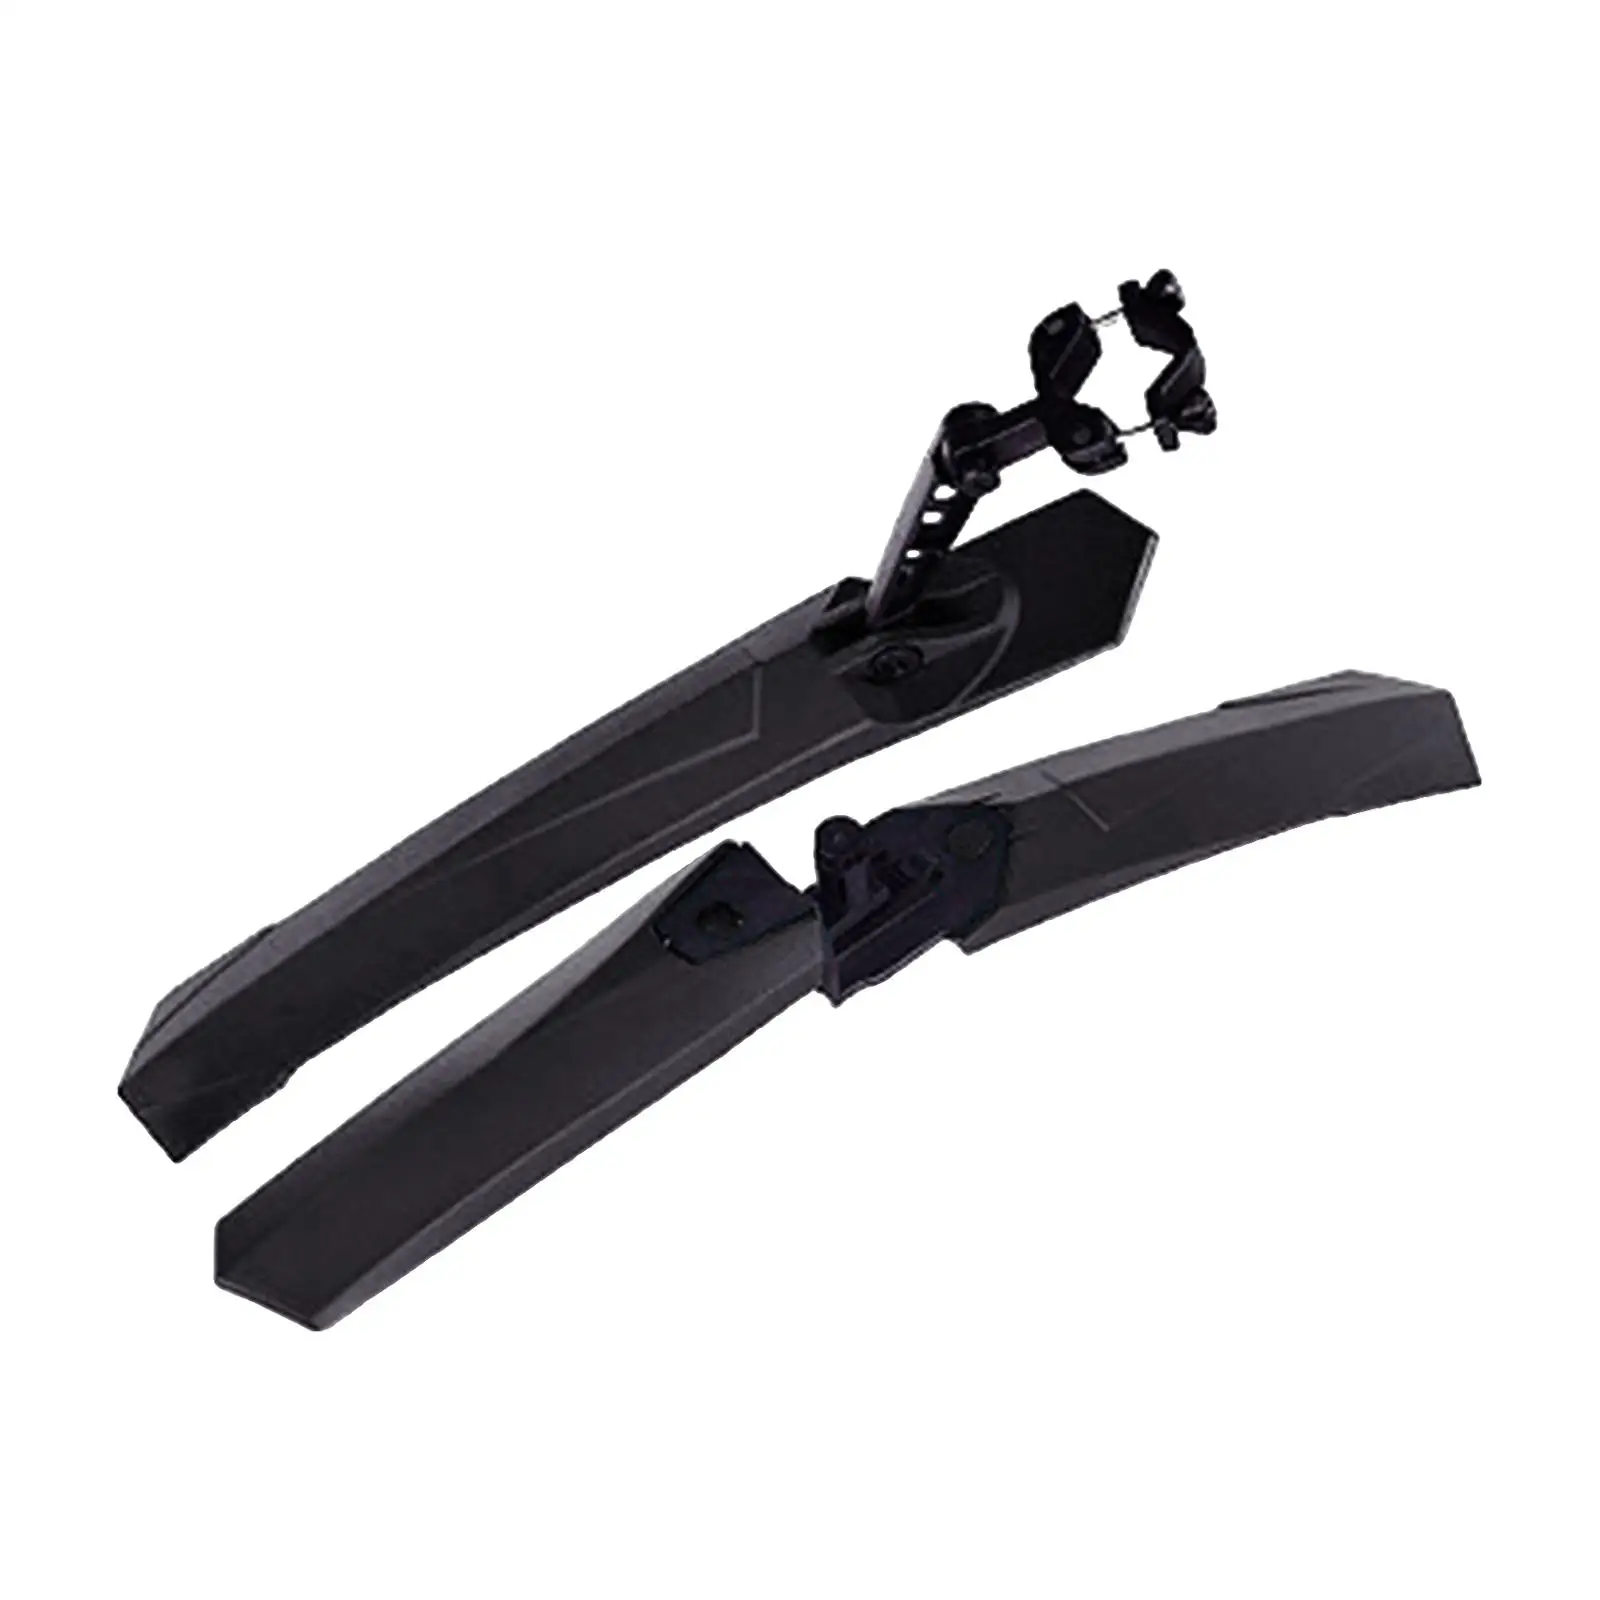 Bike Mudguard Front and Rear Set Universal Removable Adjustable Bike Fenders for Folding Bike Road Bike Riding Replaces